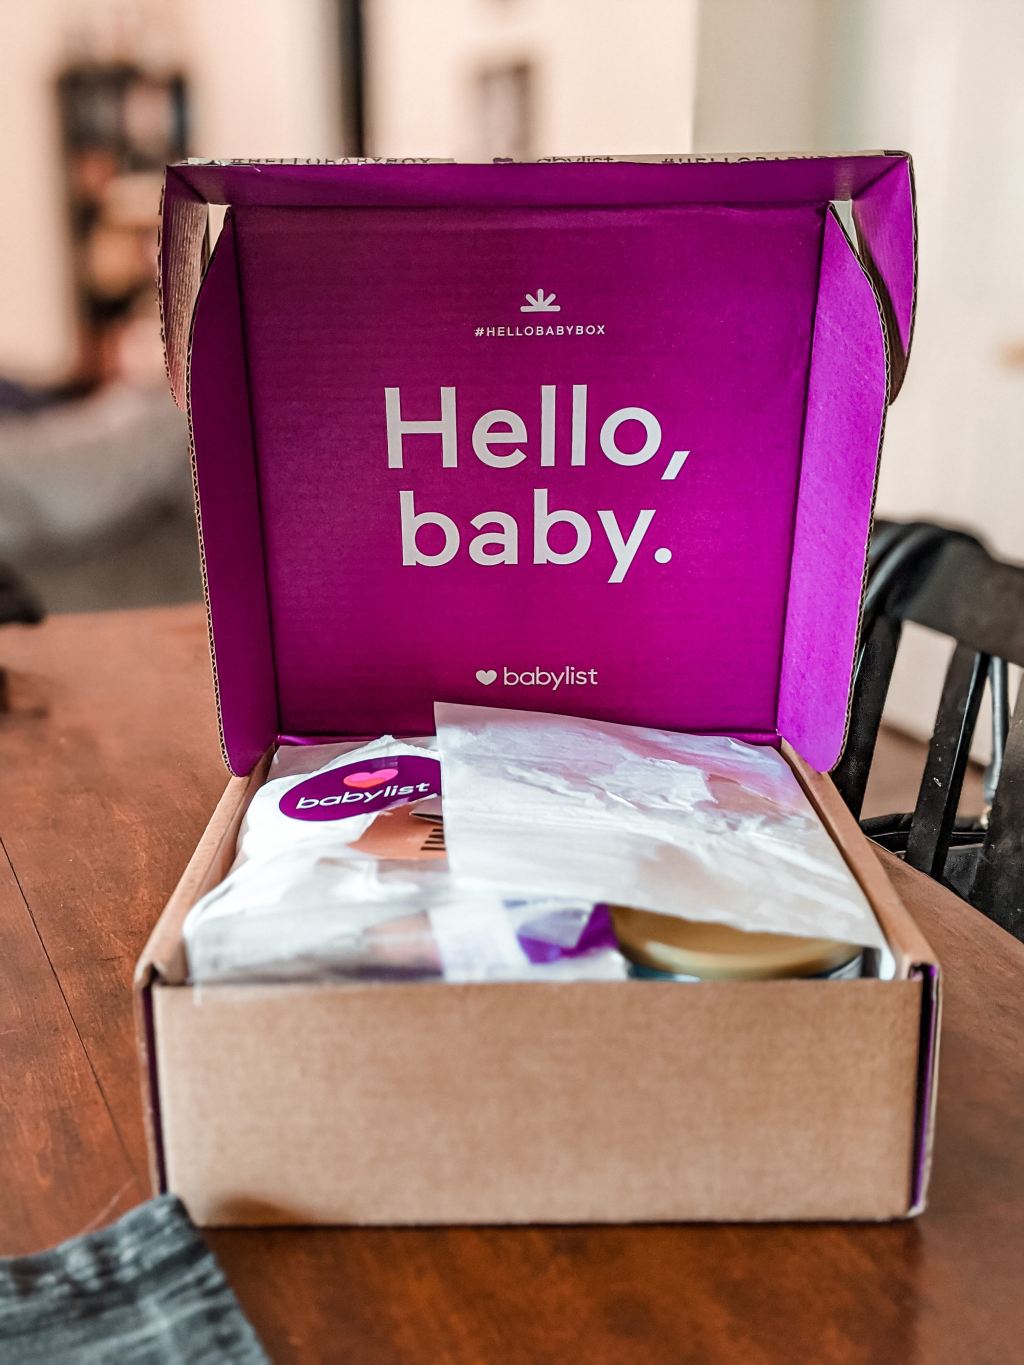 #HelloBabybox from Babylist